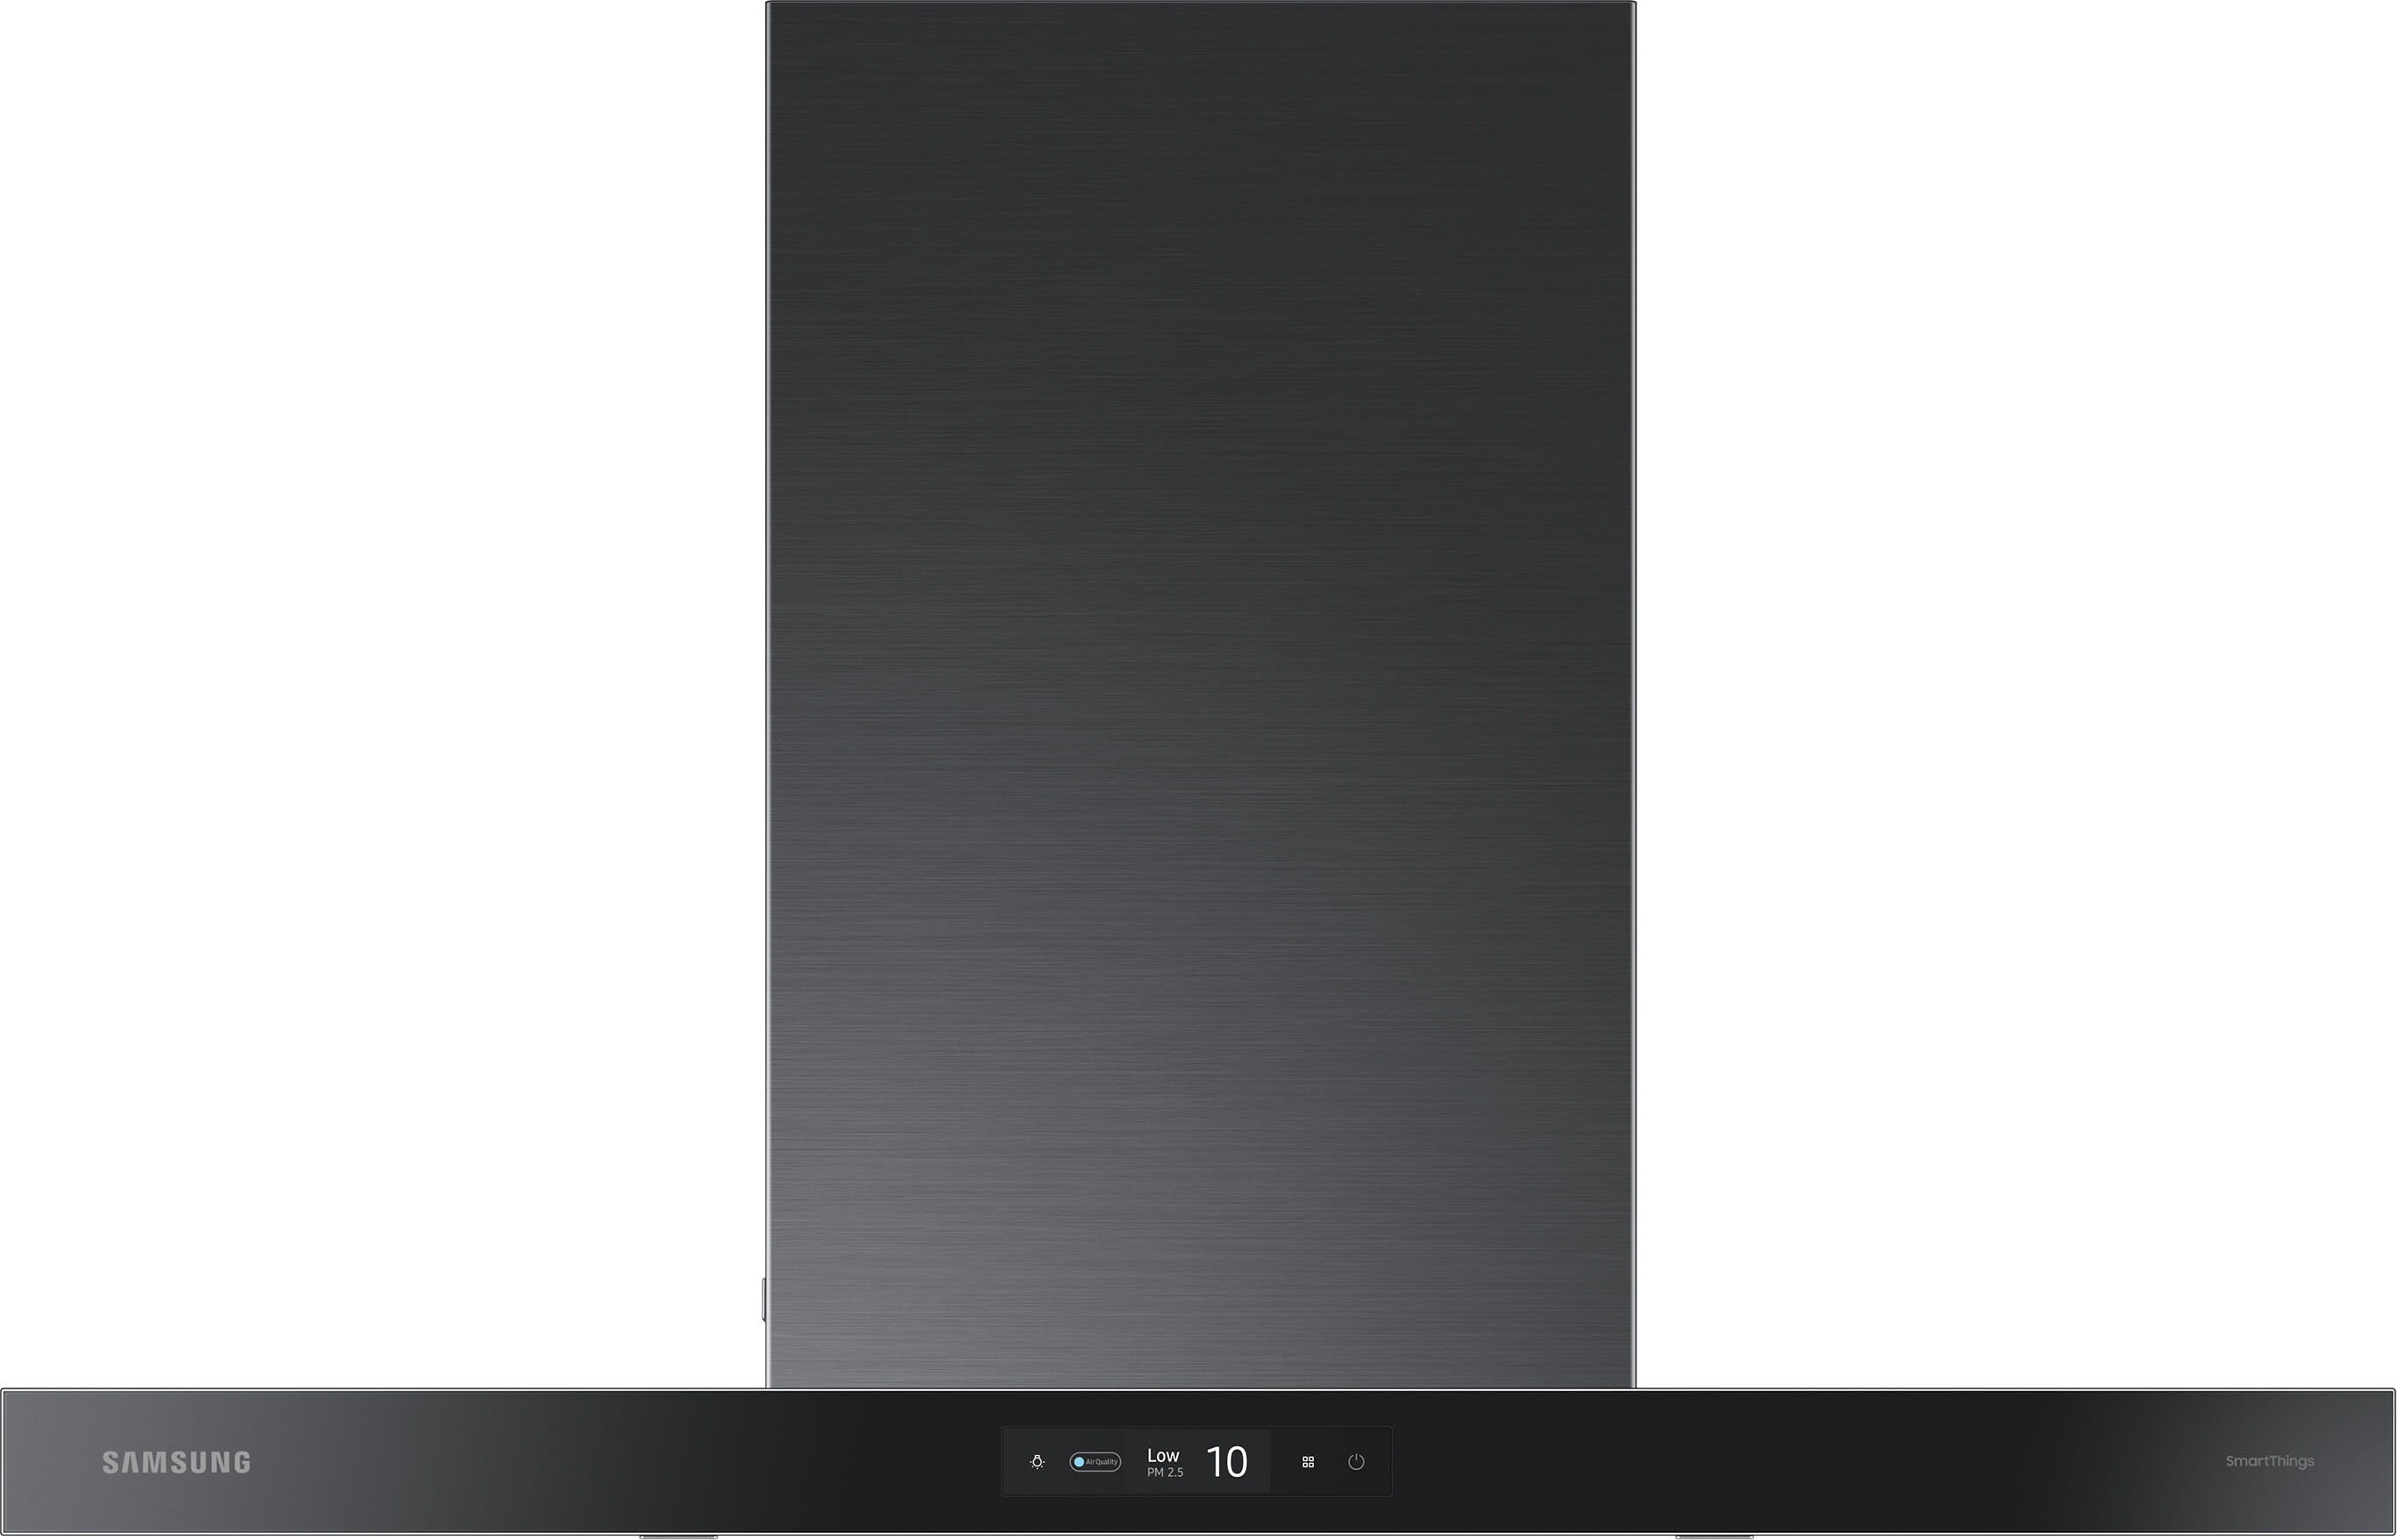 Samsung 30 Electric Cooktop with WiFi and Rapid Boil Black Stainless Steel  NZ30K7570RG - Best Buy